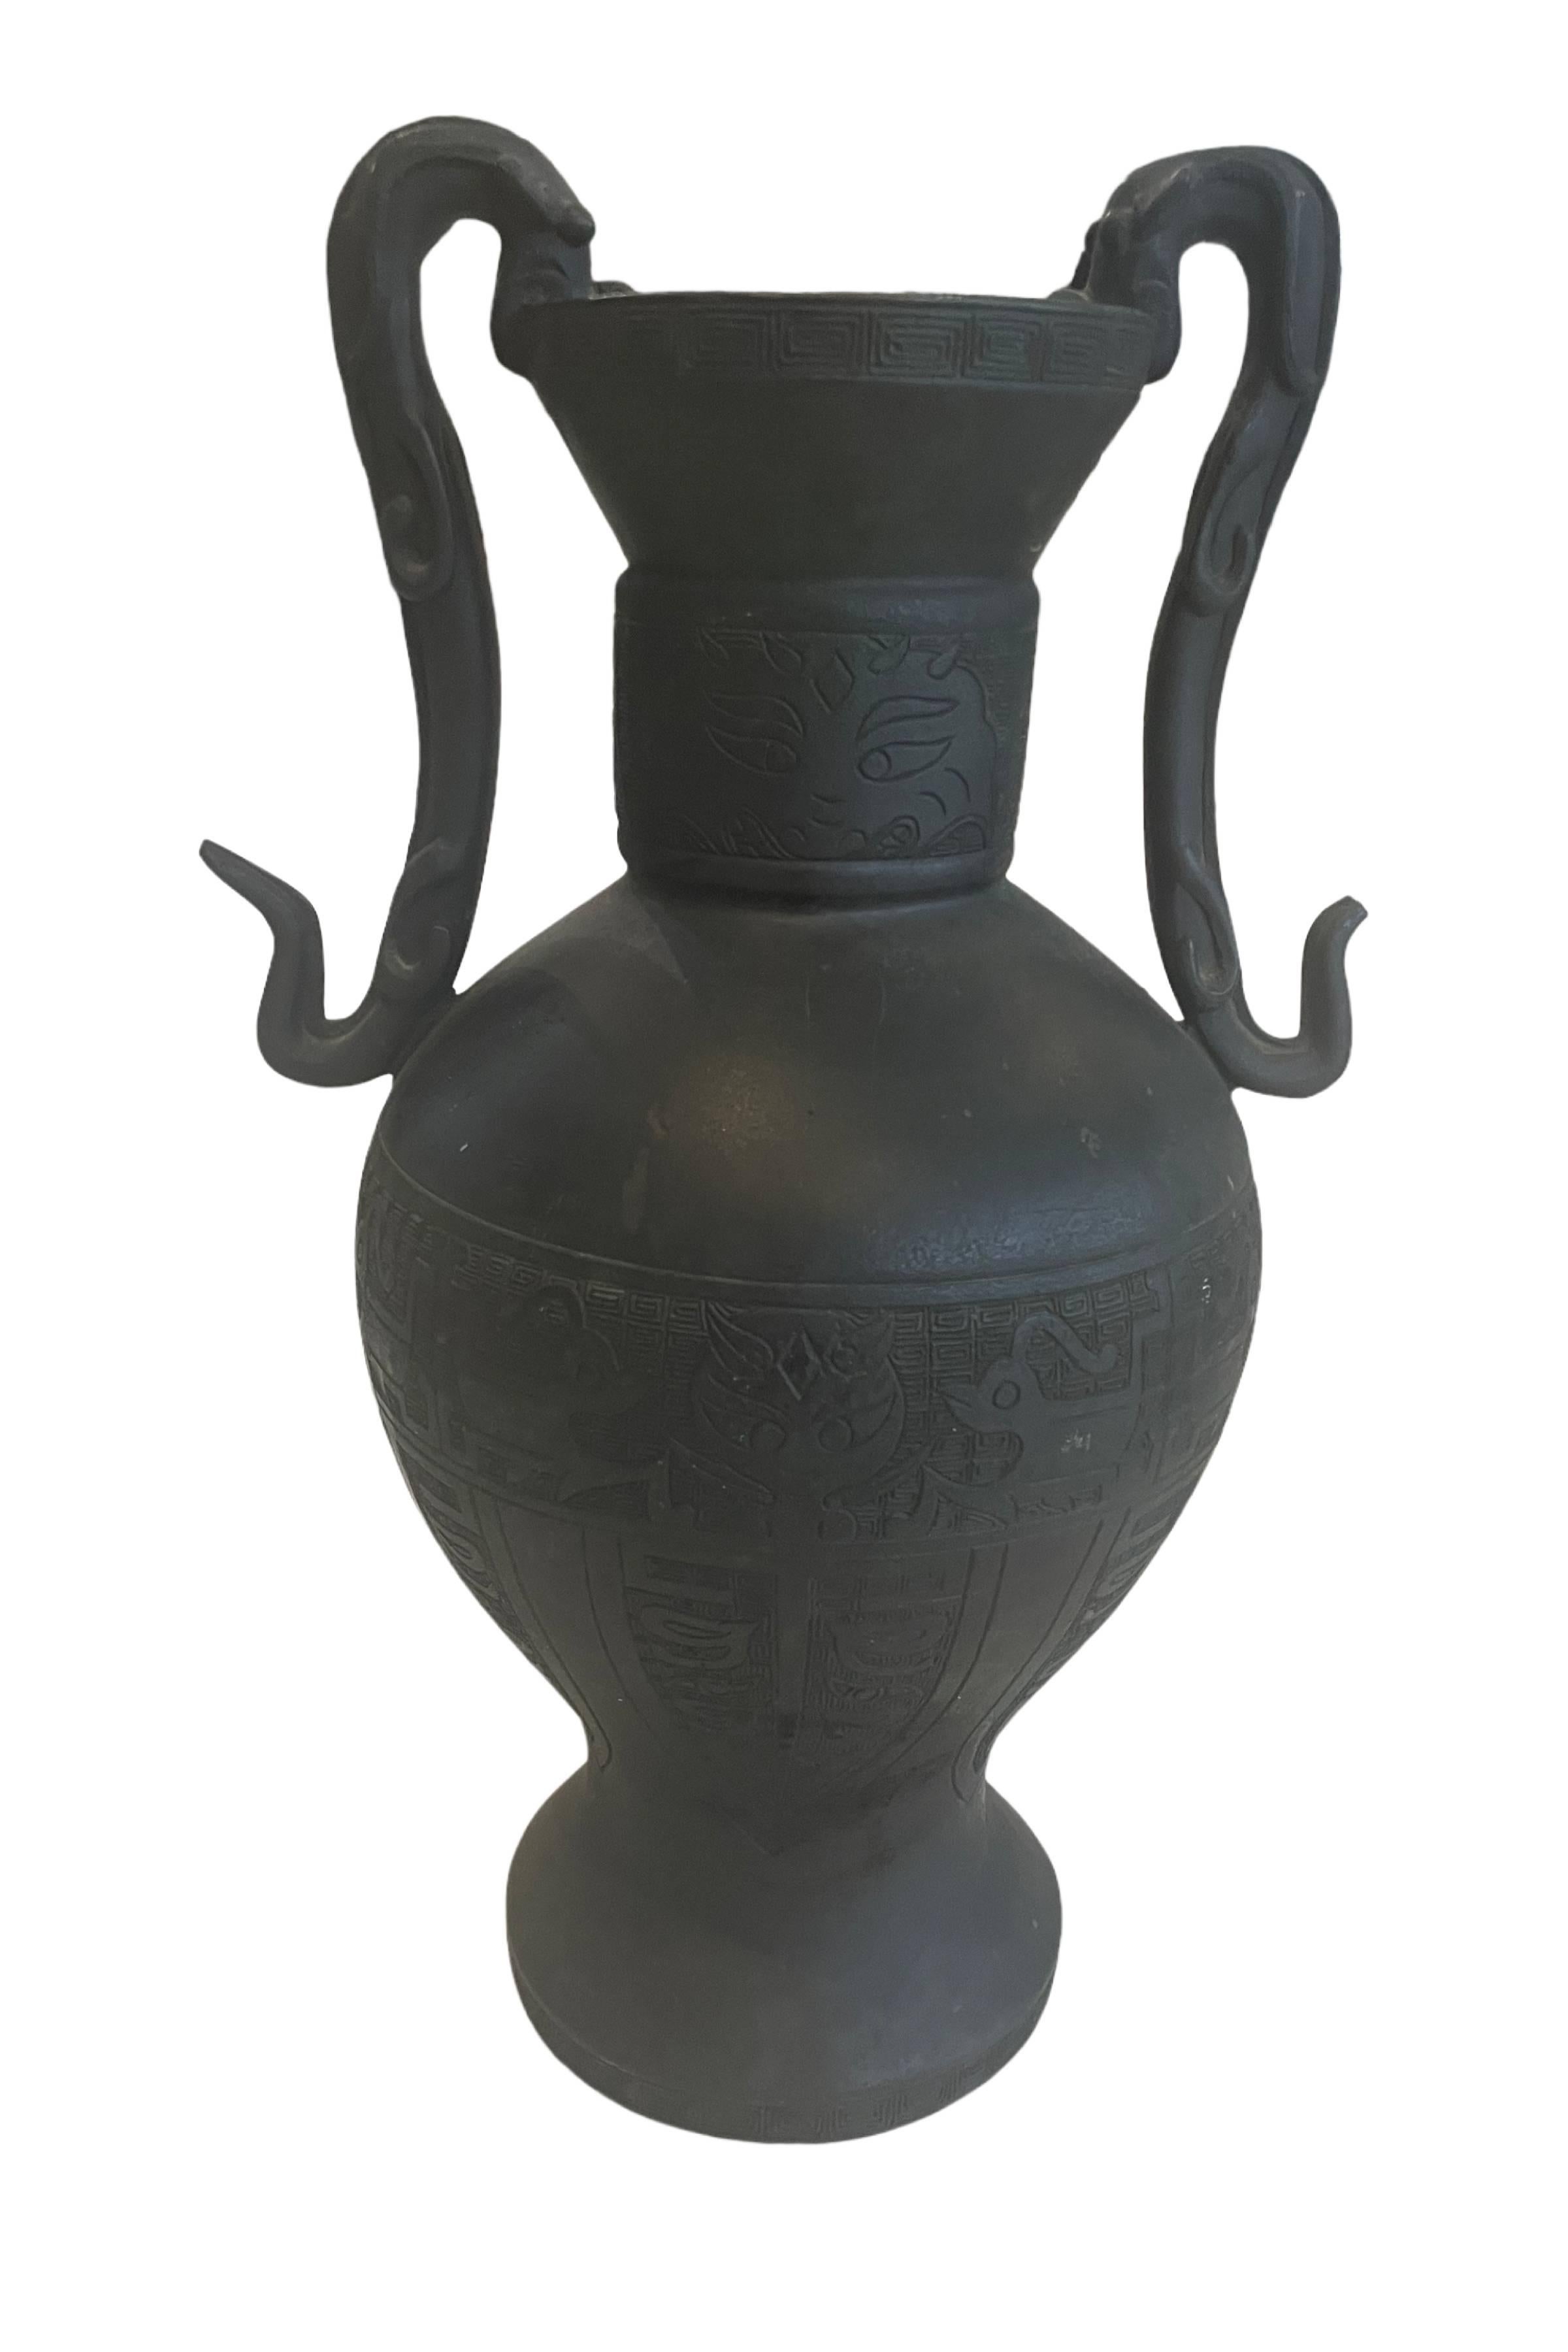 Bring the opulence and mystique of Egypt and its equally artful hieroglyphics to your space. The aged patina of the bronze exudes a timeless elegance, showcasing the meticulous craftsmanship of skilled artisans. A true testament to the allure of